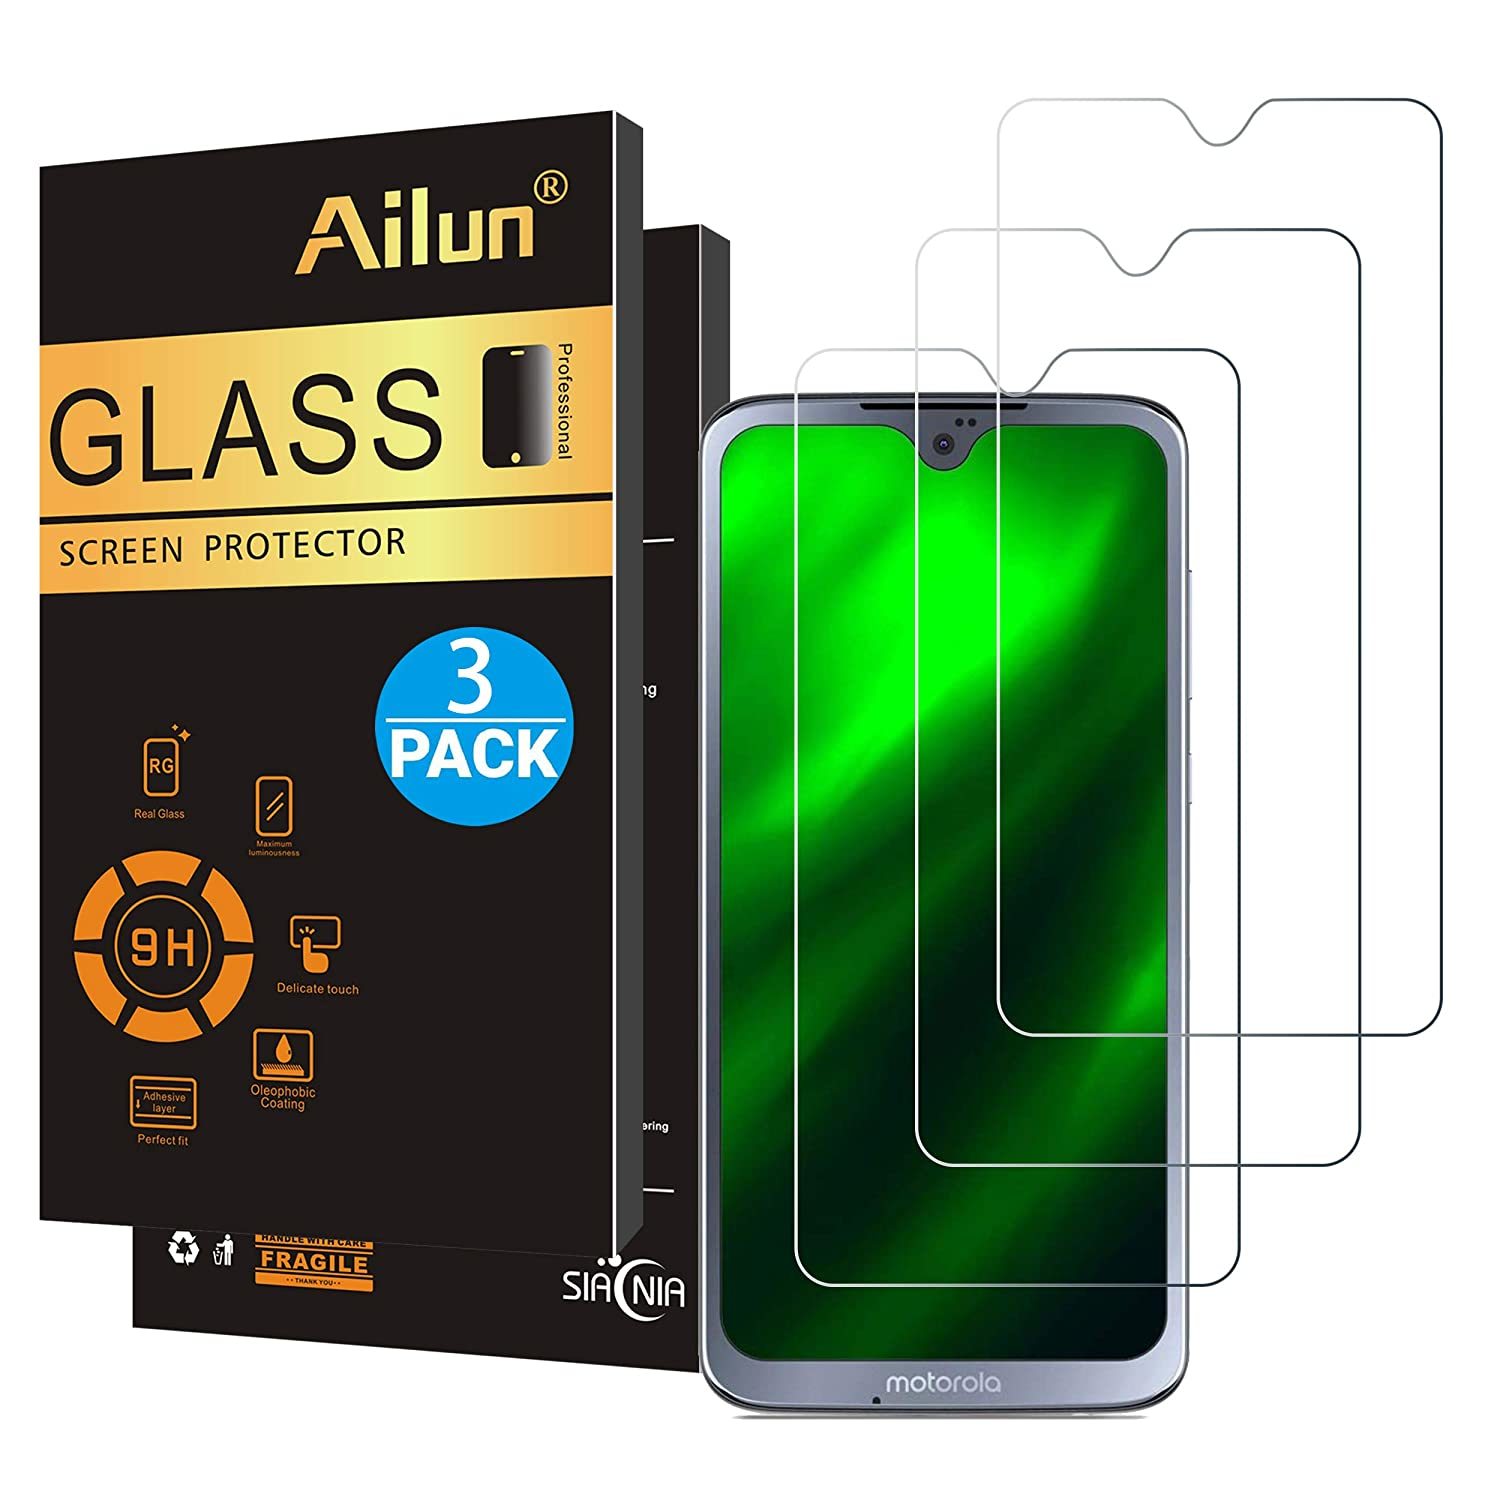 Ailun Screen Protector Compatible with Moto G7 3 Pack 9H Hardness Tempered Glass